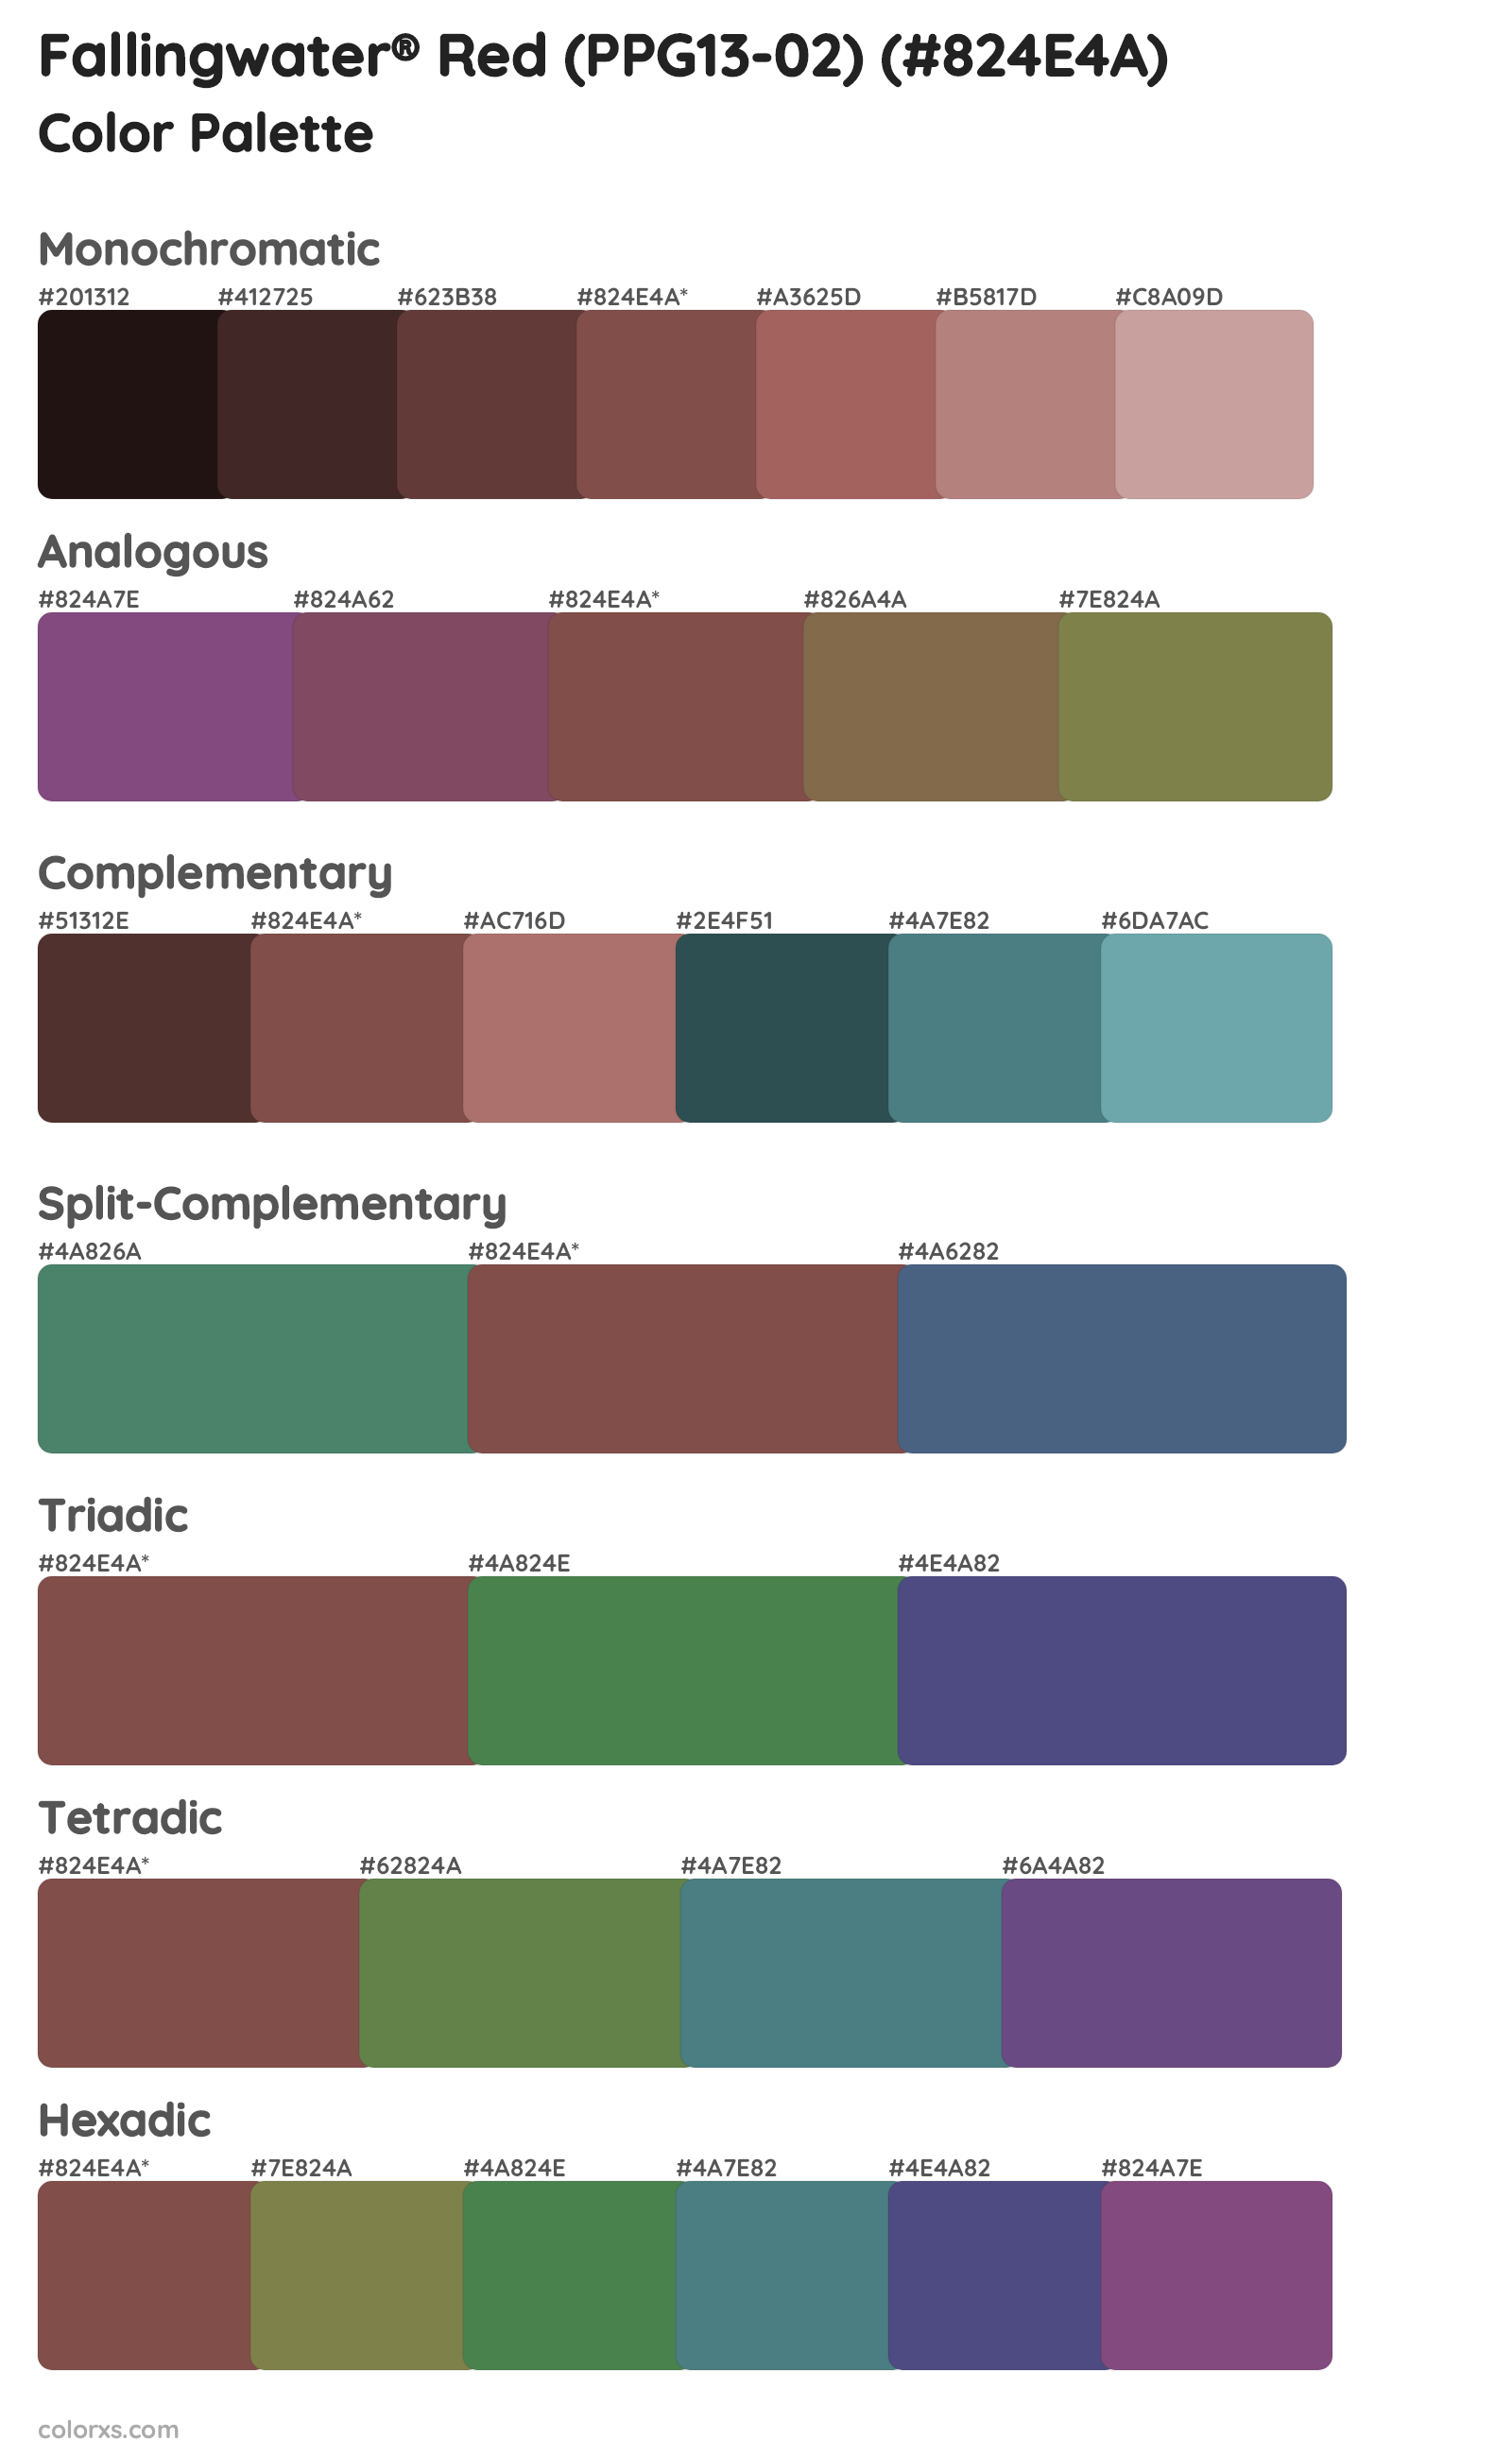 Fallingwater® Red (PPG13-02) Color Scheme Palettes